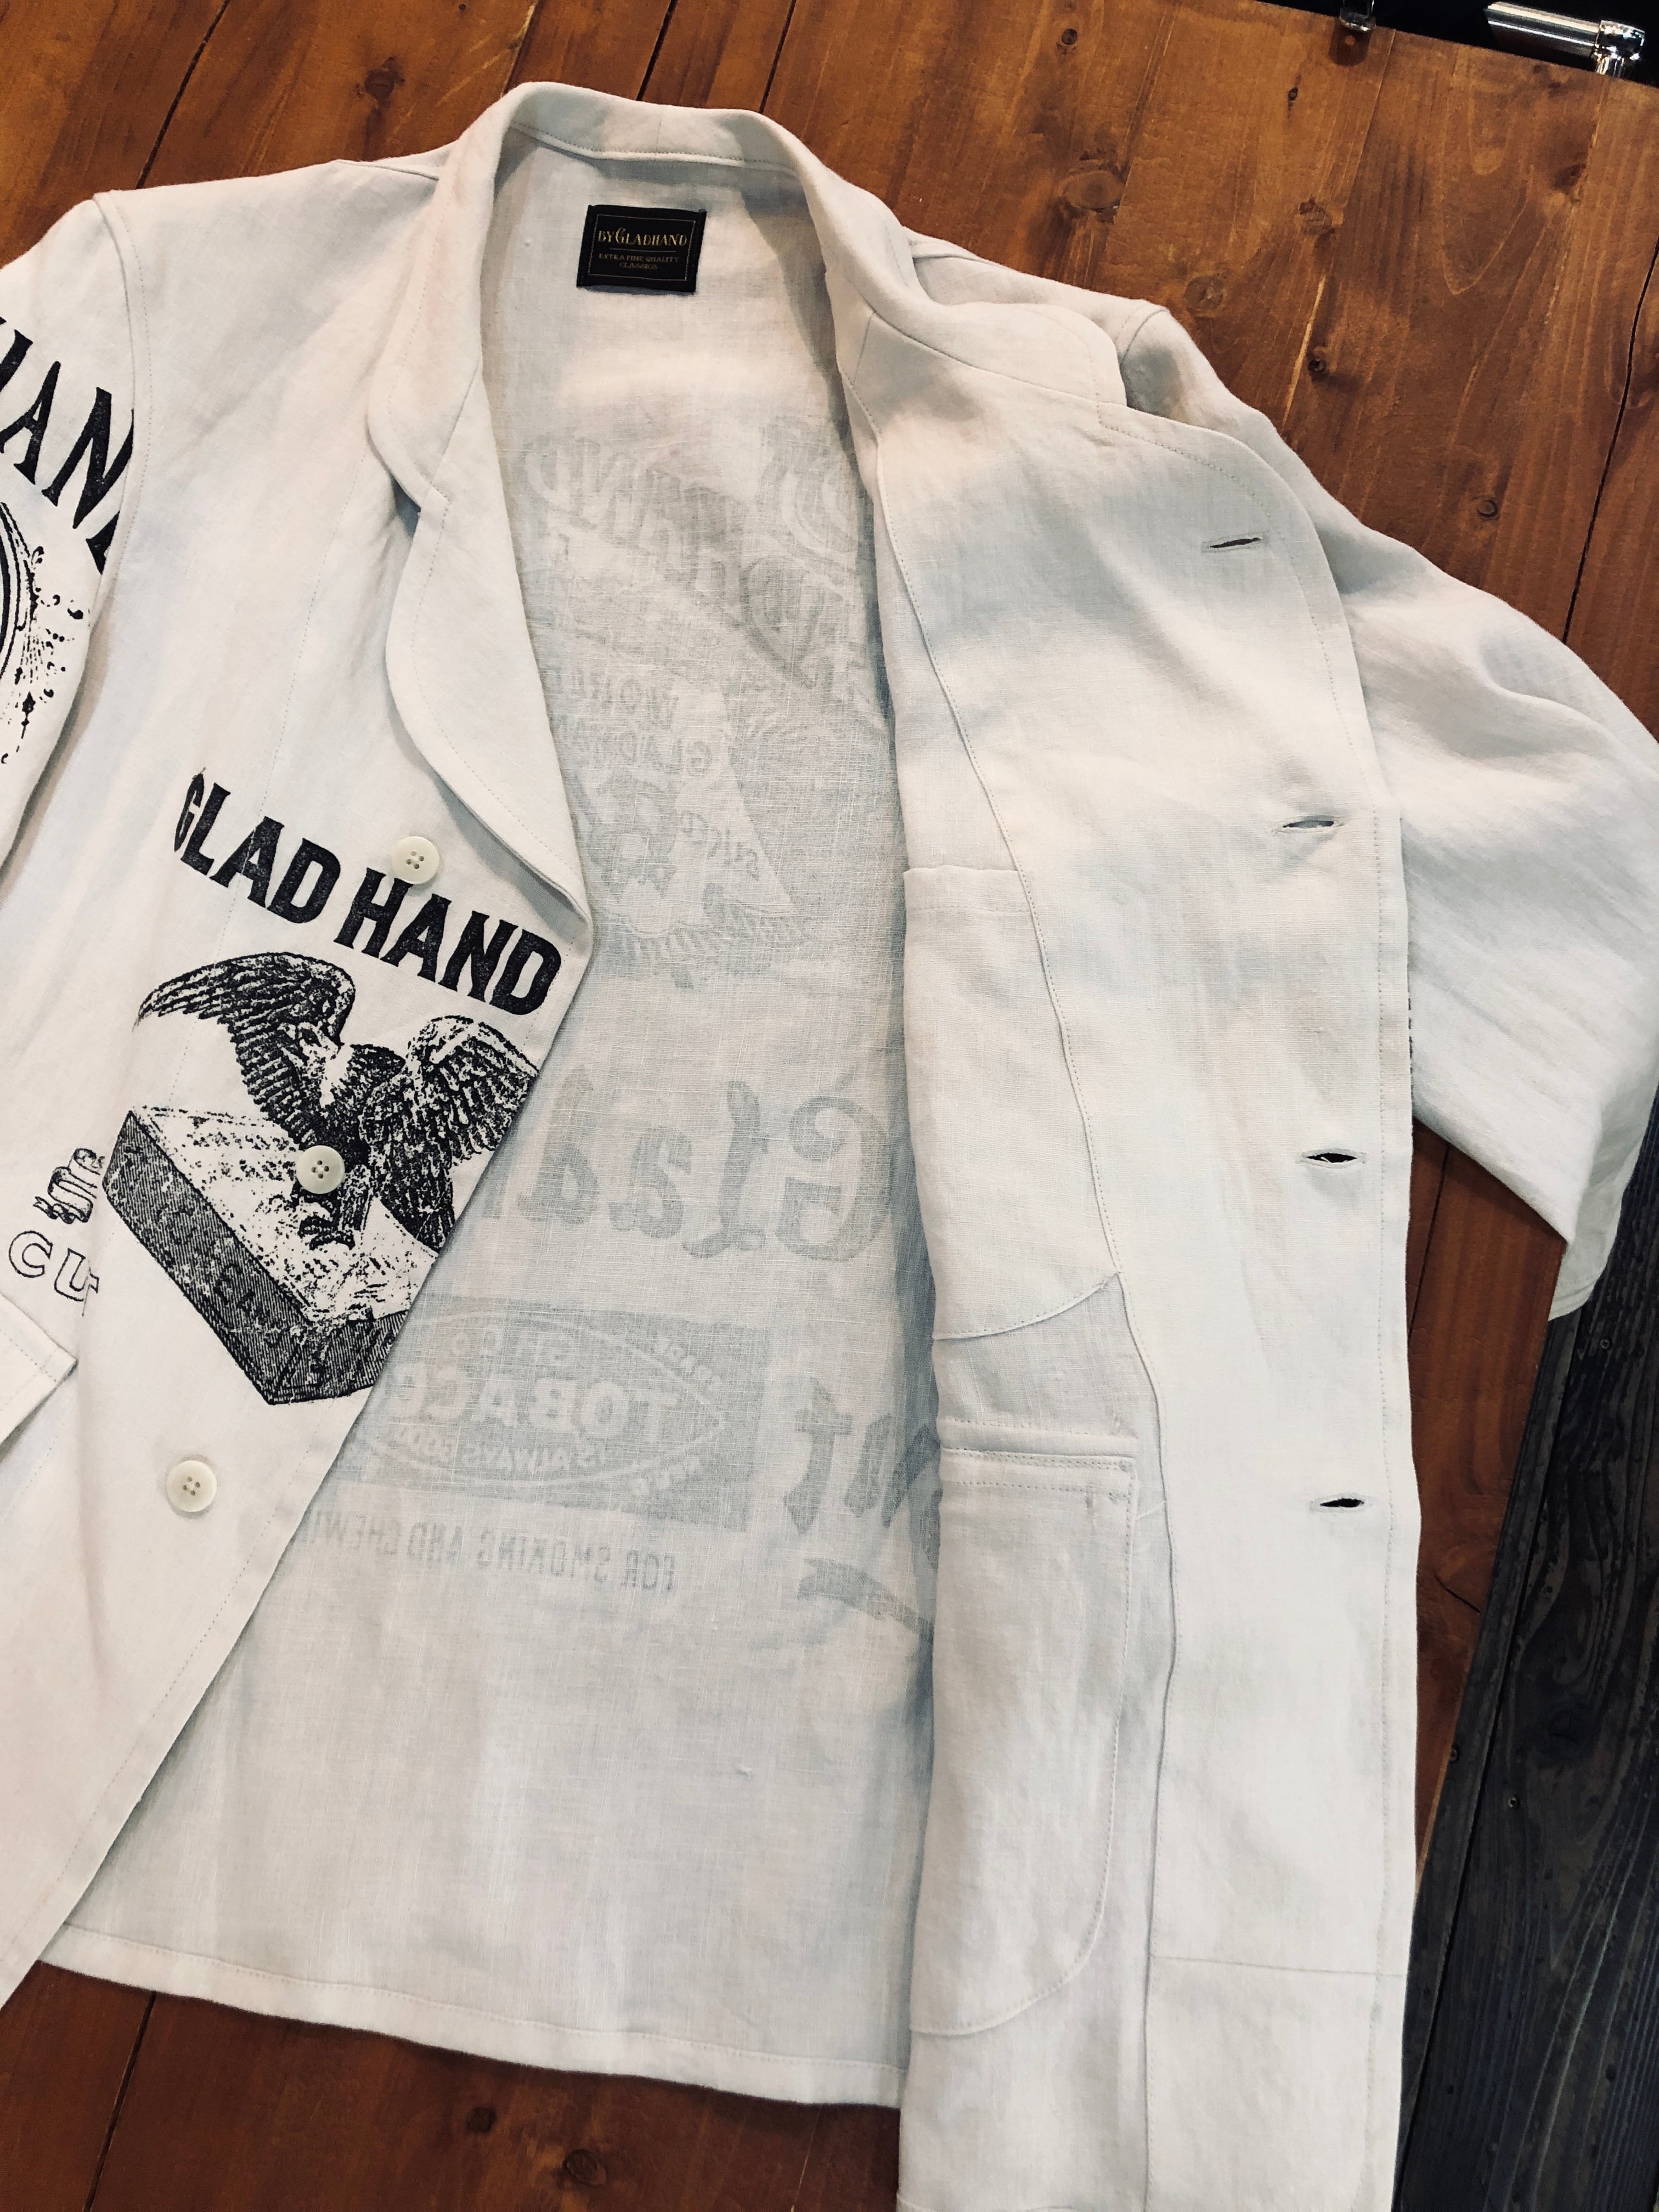 BY GLAD HAND】バイ グラッド ハンド FOR SMOKING - LINEN JACKET